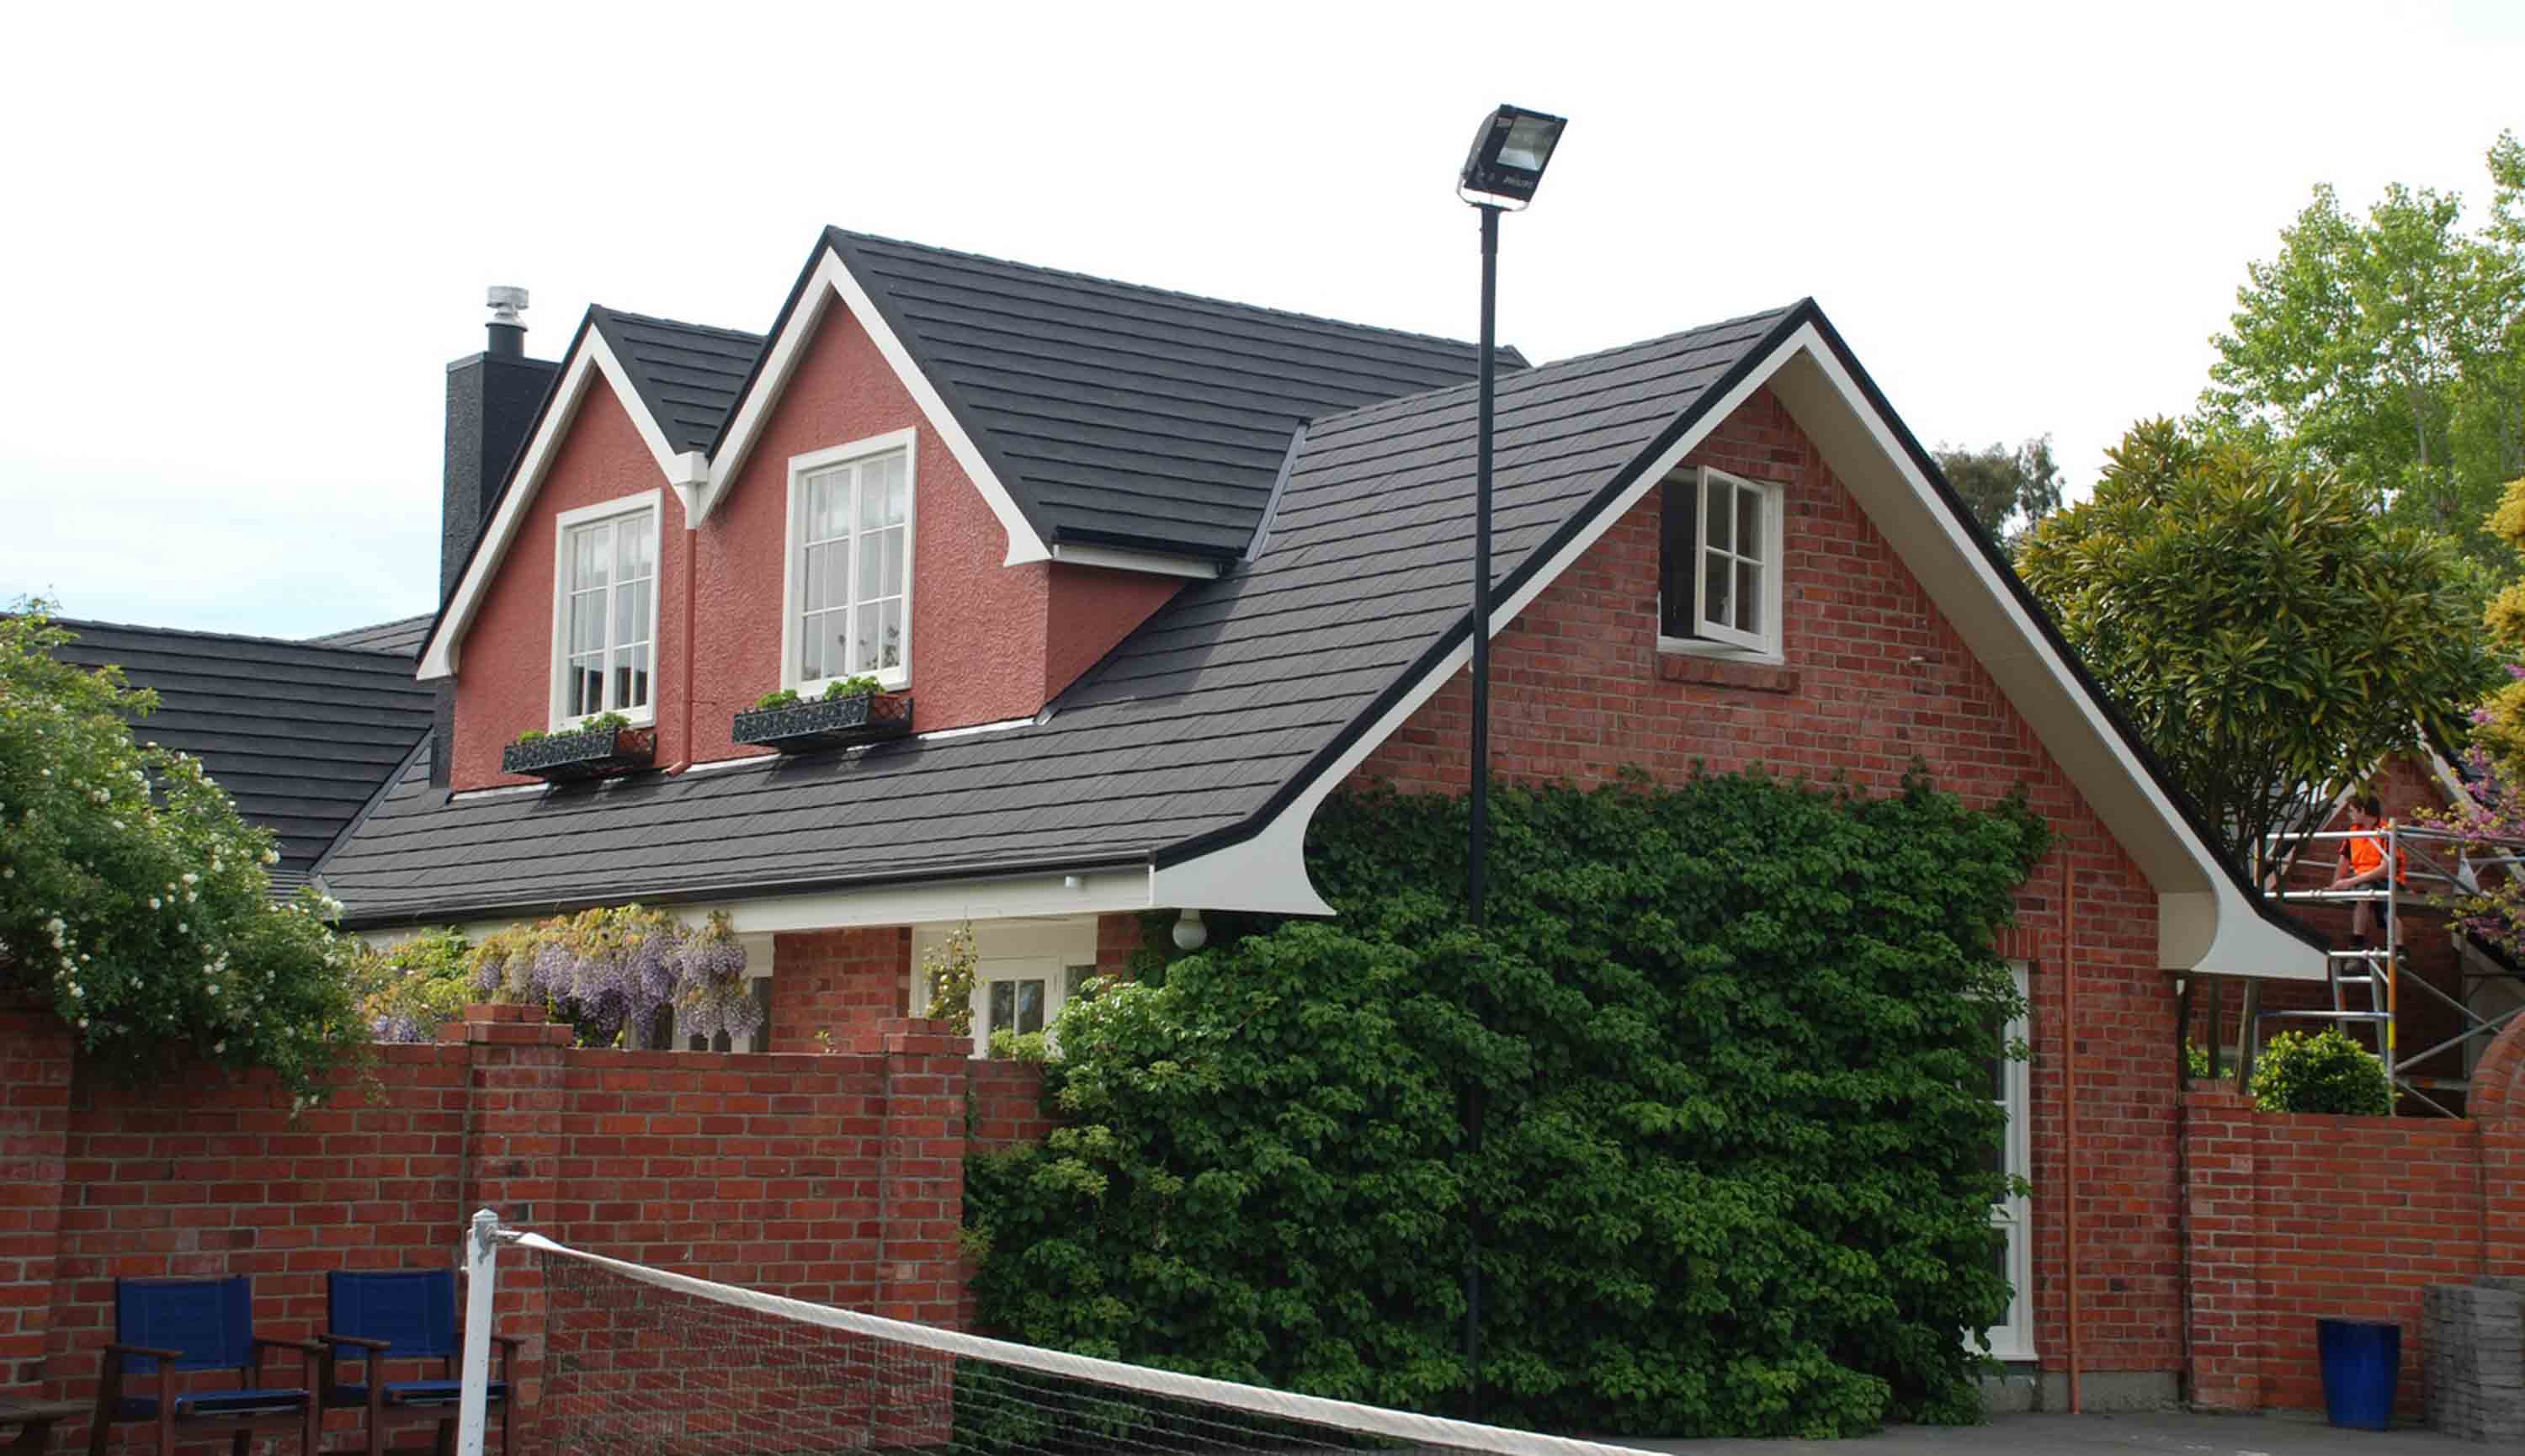 Home re-roofed in CF Slate lightweight metal roofing after being damaged from earthquake